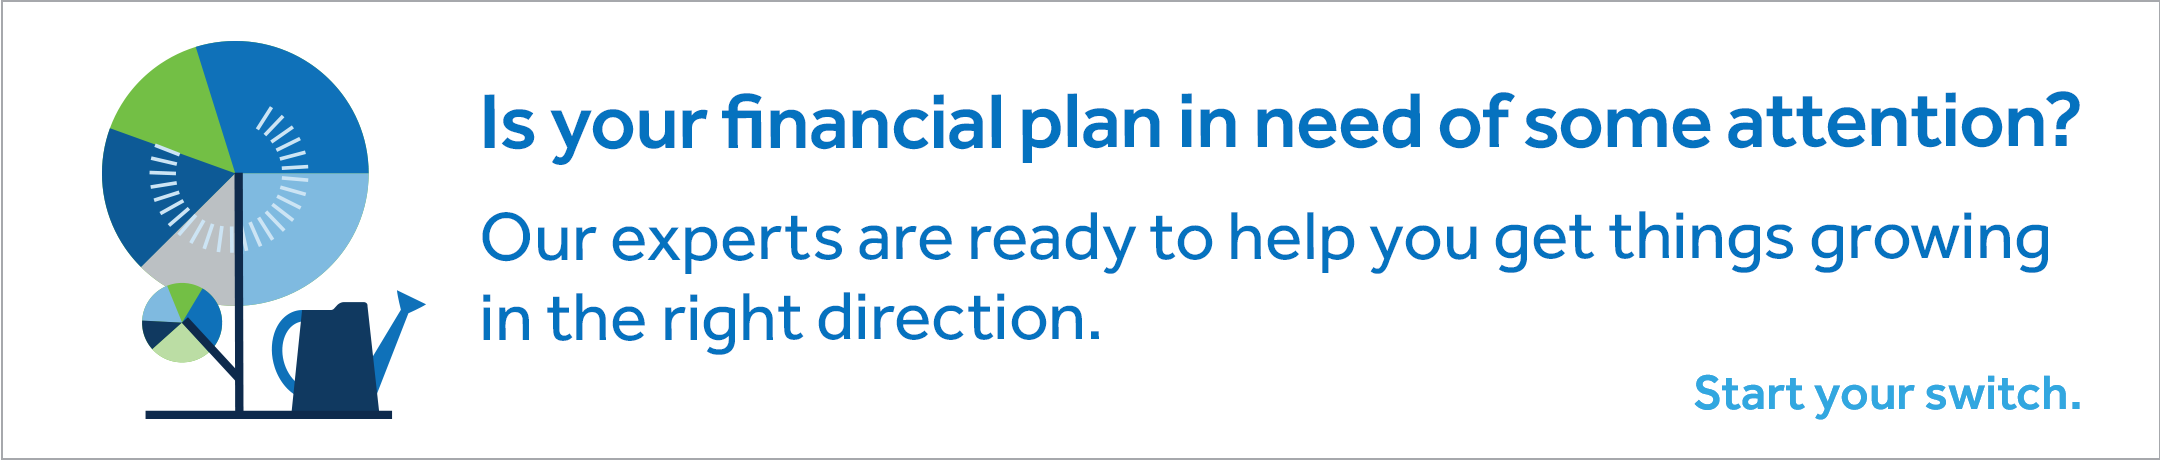 An advertisement asking "Is your financial plan in need of some attention? Our experts are ready to help you get things growing in the right direction. Start your switch." to the left of the text is an illustration of a stylized tree and watering can.